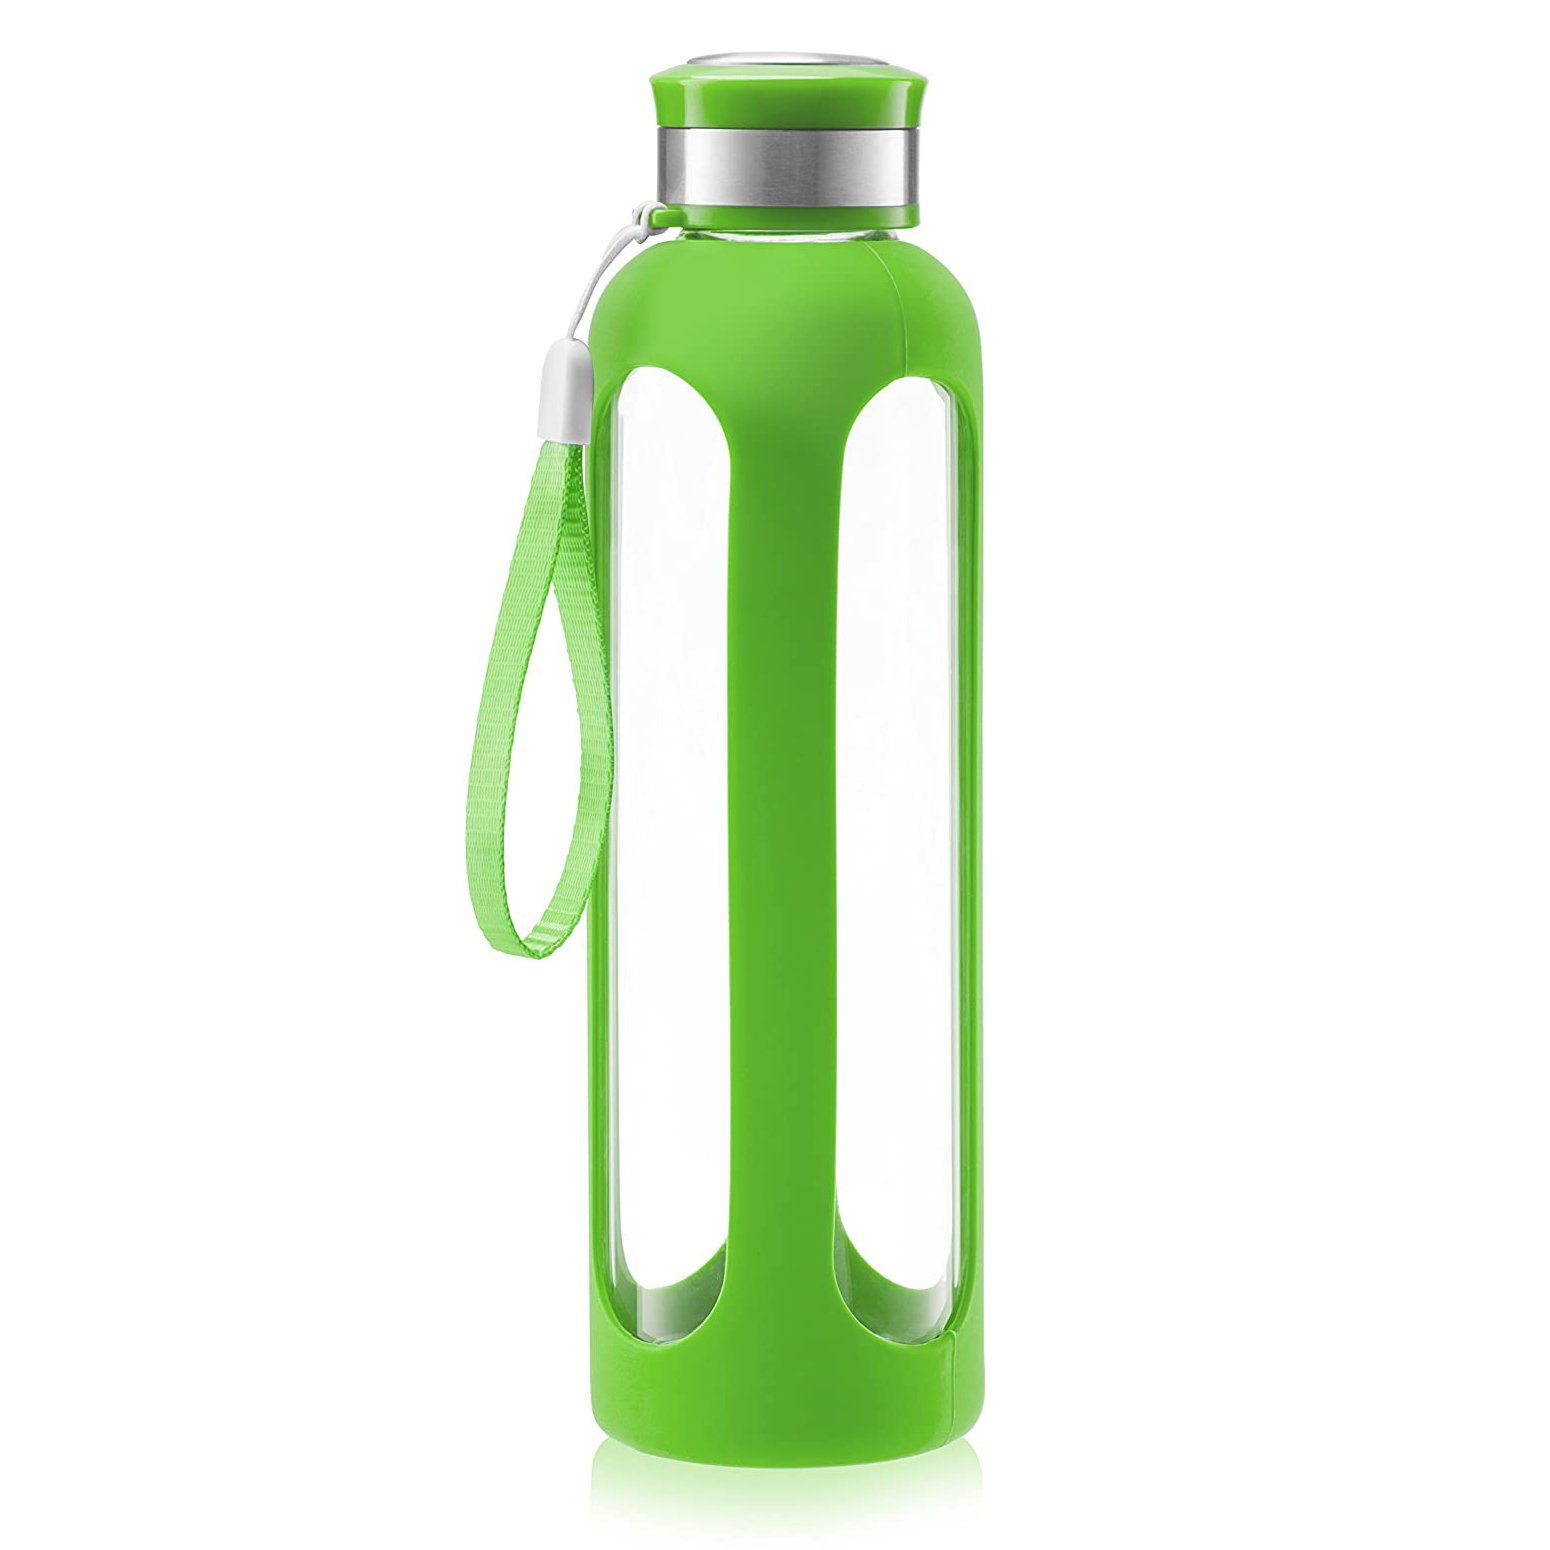 Swig Savvy Glass Water Bottles with Protective Silicone Sleeve &amp; Stainless Steel Leak Proof Lid / Green